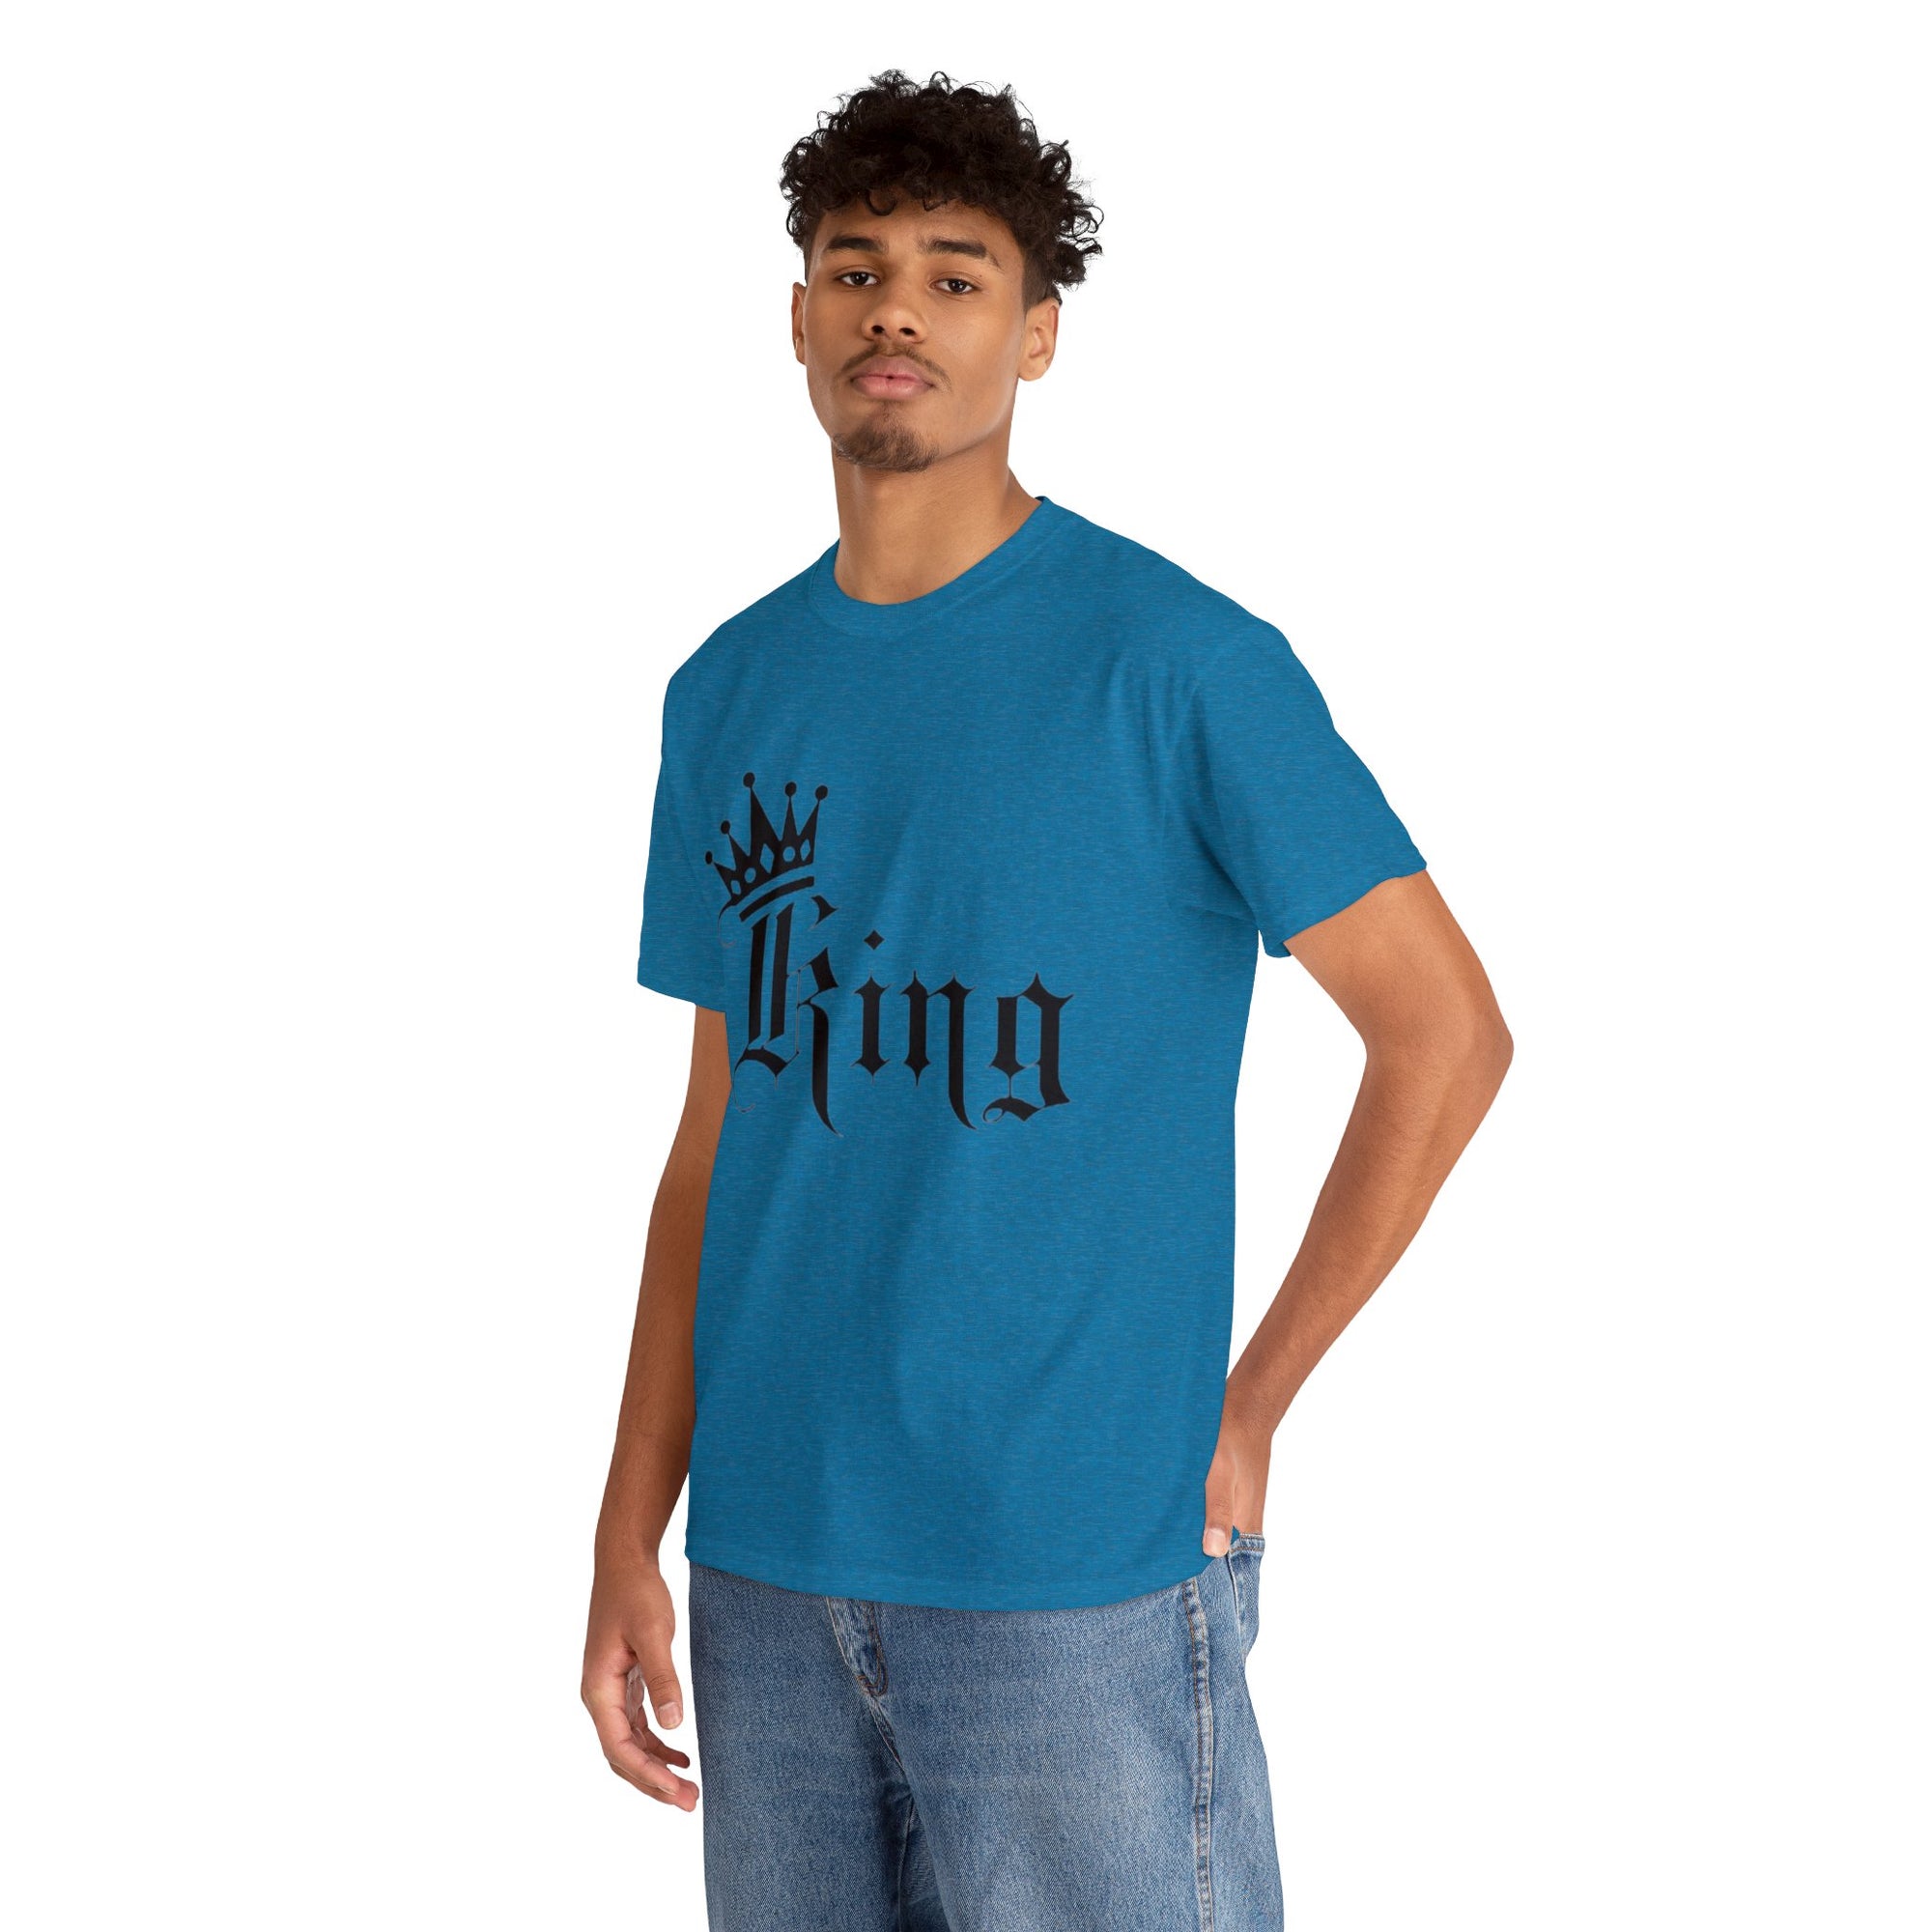 Graphic designed "King" T-Shirt